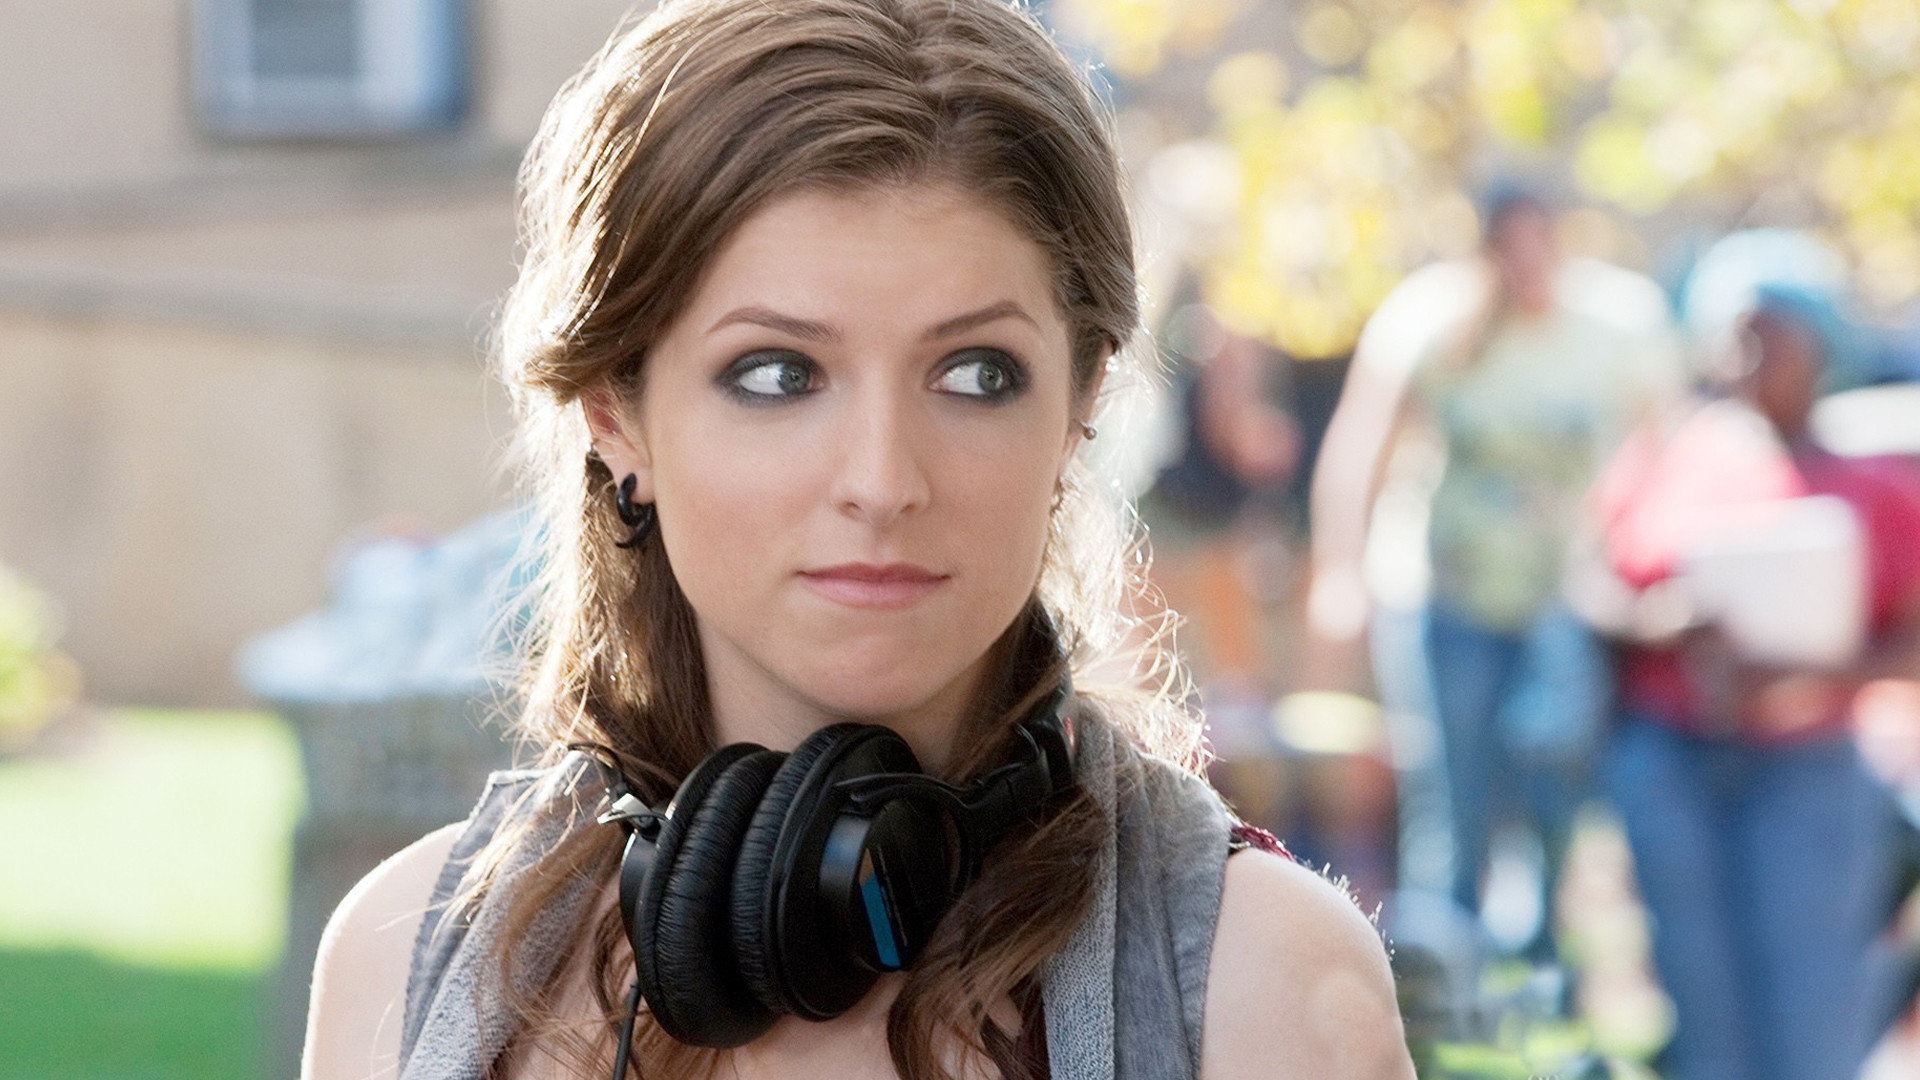 Awesome Anna Kendrick free wallpaper ID:445919 for full hd 1920x1080 desktop